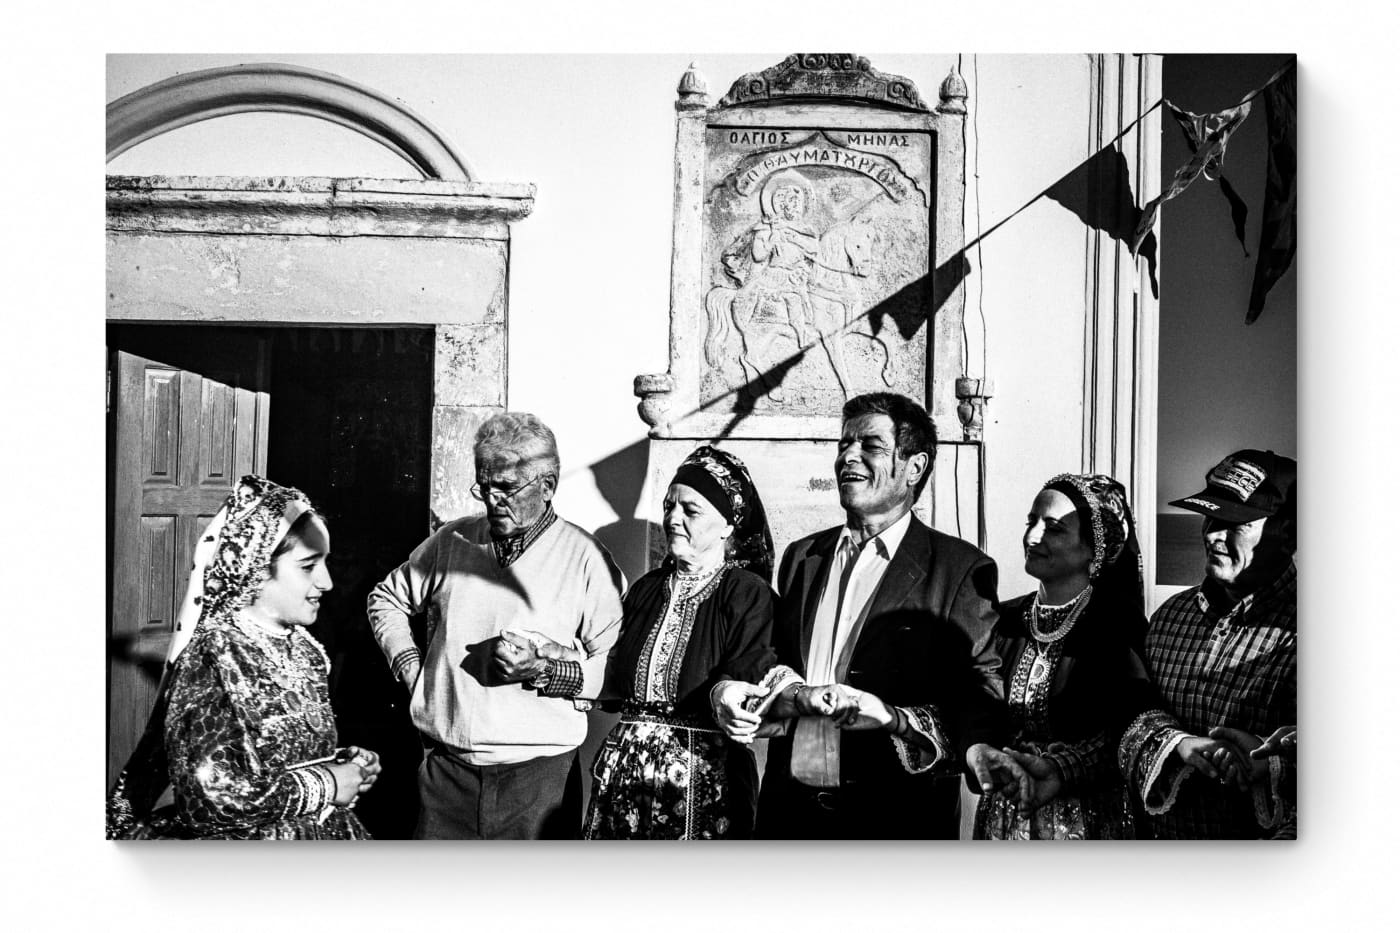 Black and White Photography Wall Art Greece | Dancing Pano Choros during a celebration at Saint Minas Olympos Karpathos Dodecanese by George Tatakis - whole photo